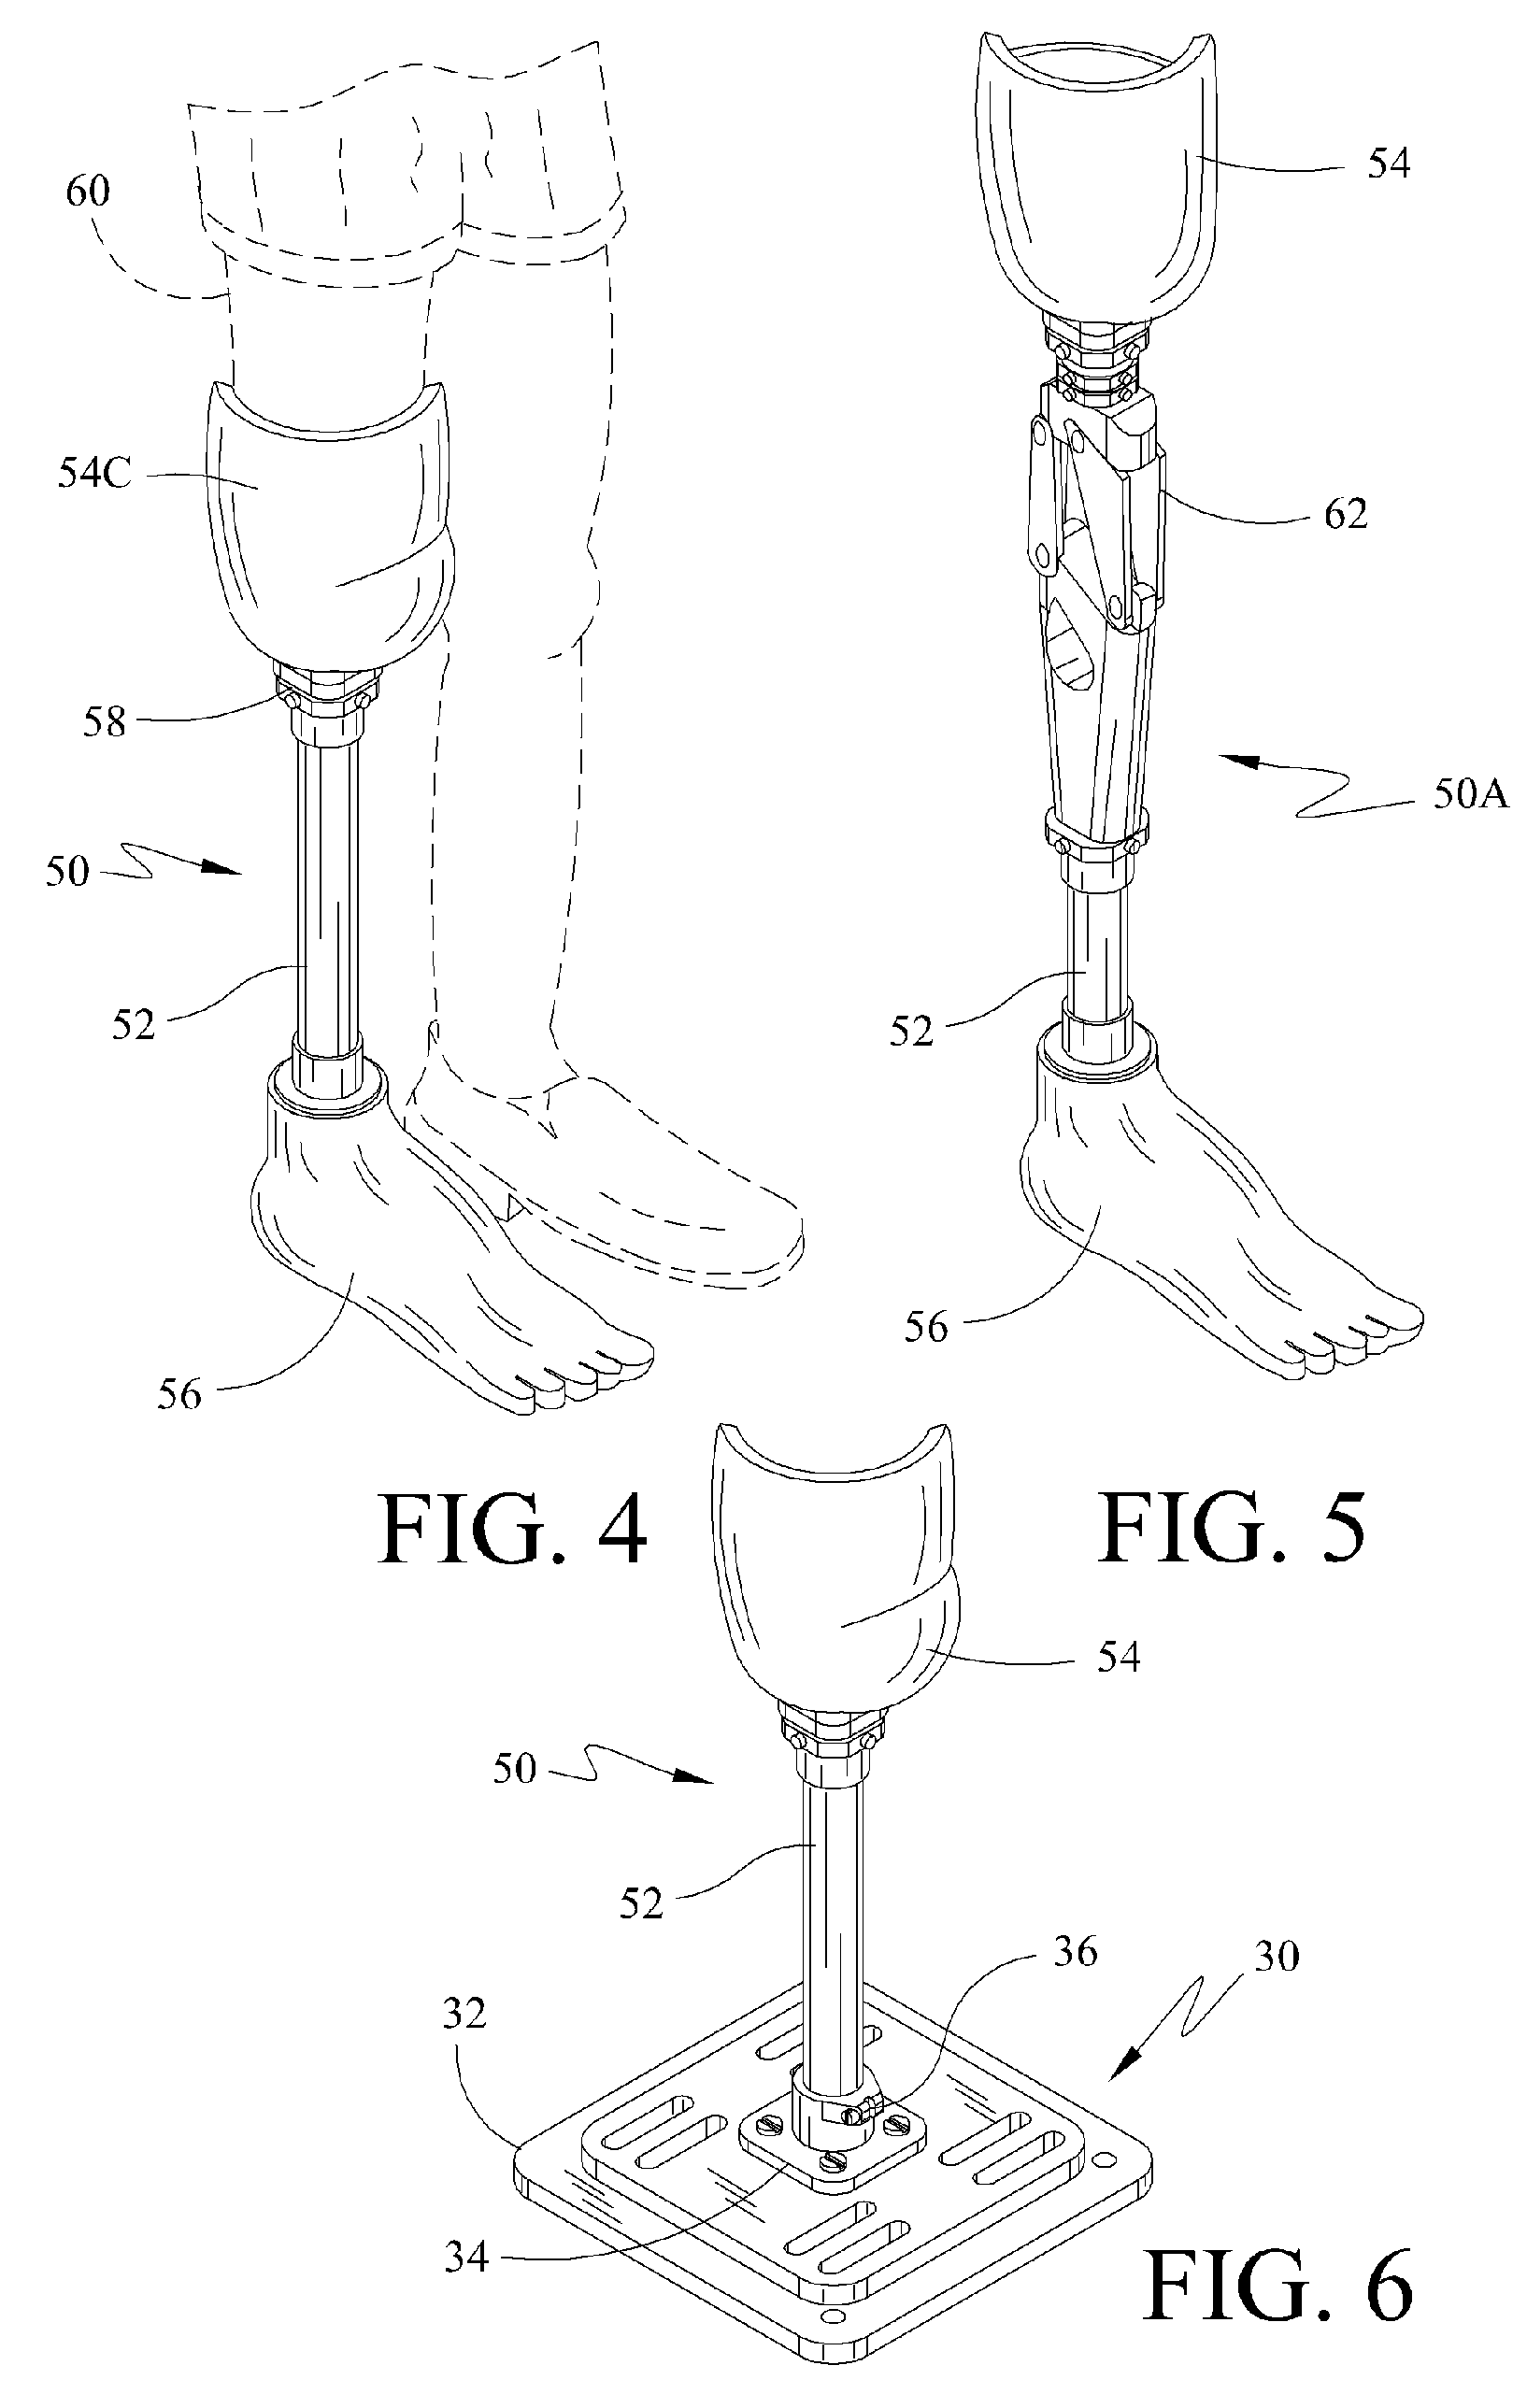 Method and Apparatus for Restoring Alignment of the Support Socket in the Manufacture of Leg Prostheses